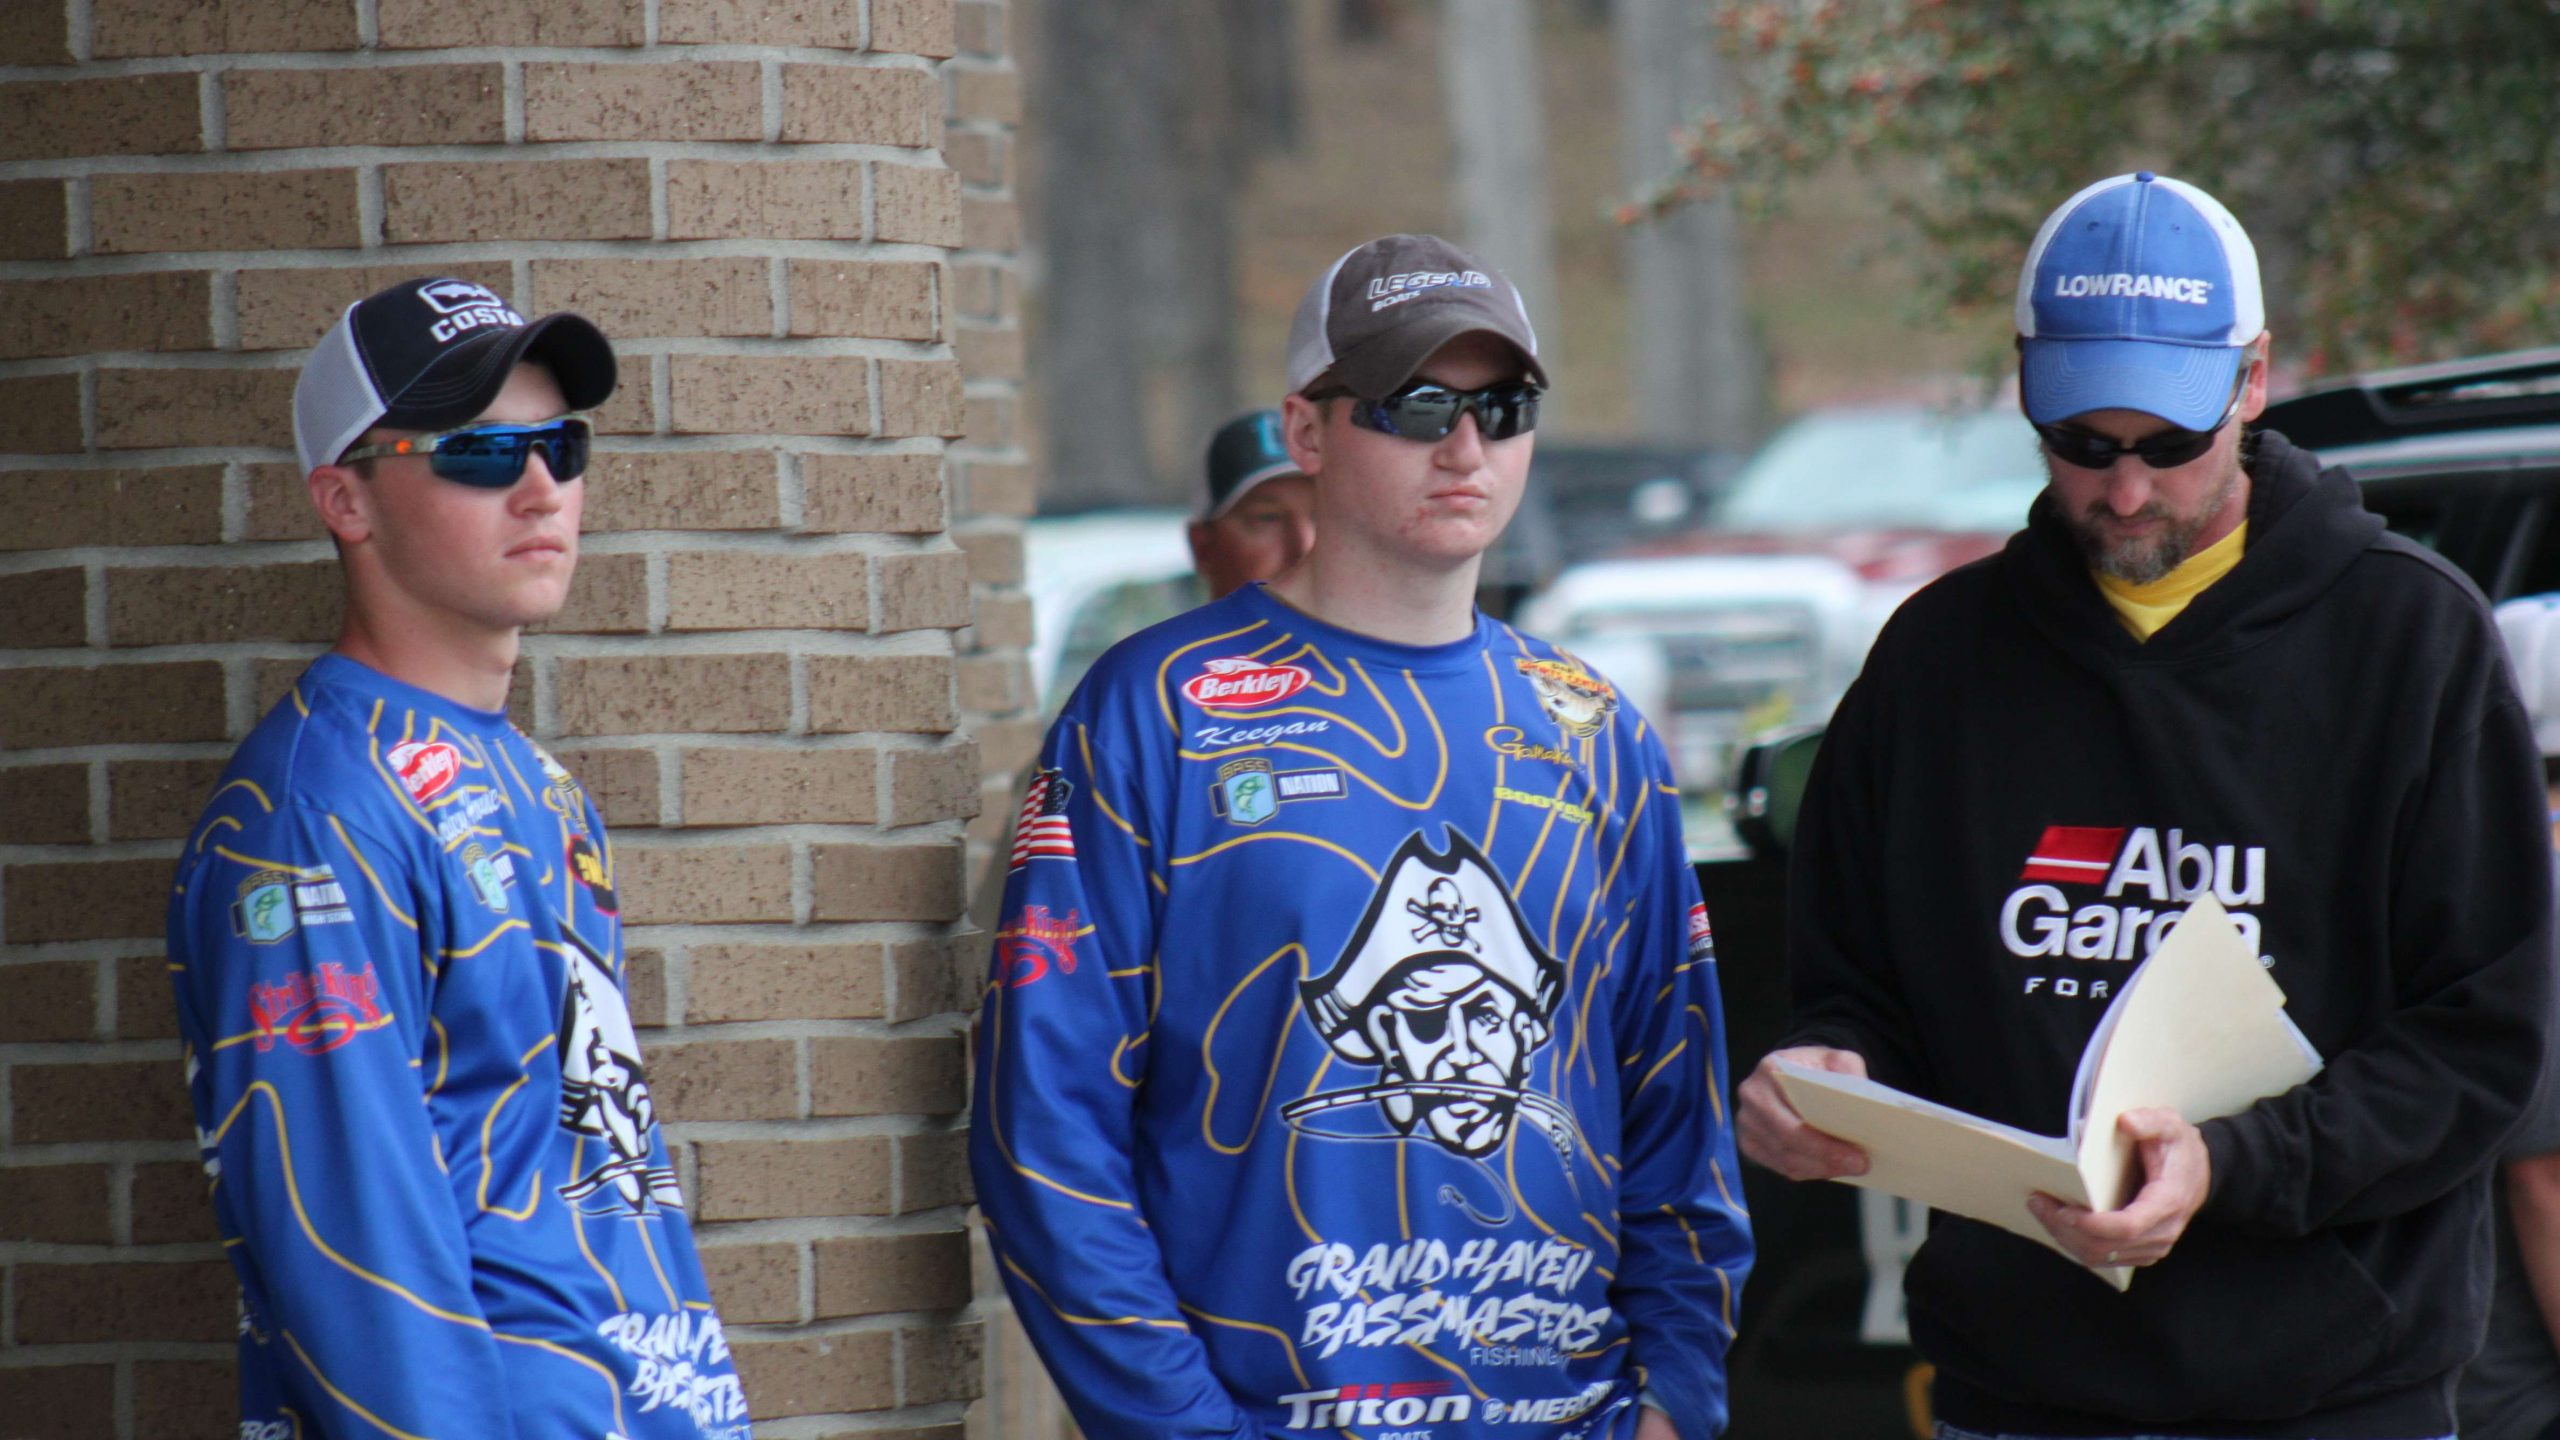 Grand Haven (Mich.) High anglers traveled 1,100 miles to
compete in the Costa Bassmaster High School Central Open here in
Louisiana. From left are Bailey House, Keegan Findley, and captain
Scott Findley.